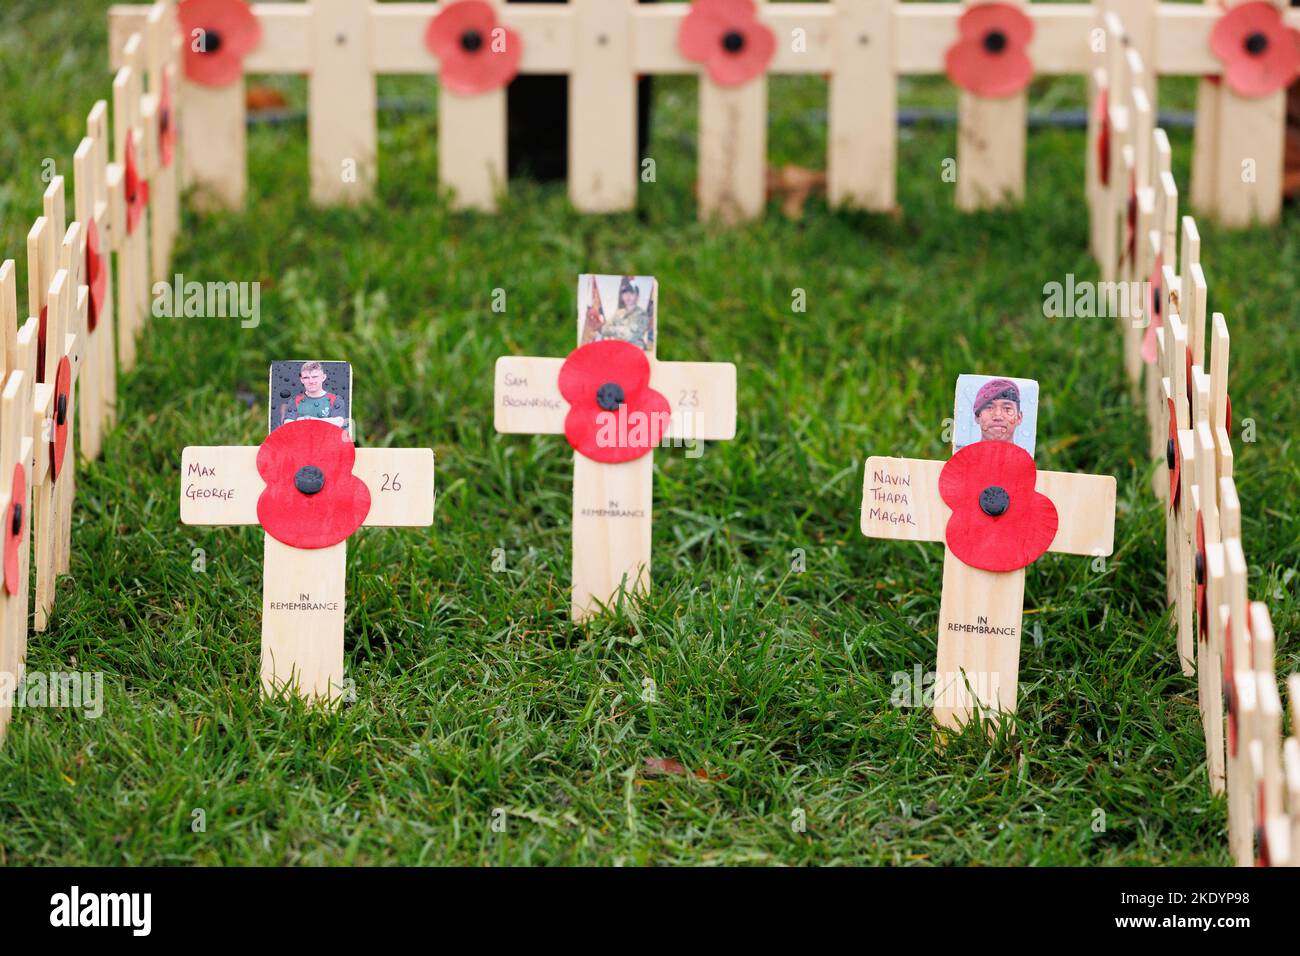 The dedication of the poppy field of remembrance at the National Memorial Arboretum in Staffordshire, UK. Poppies planted in remembrance of loved ones who died in active service in 2022. Stock Photo